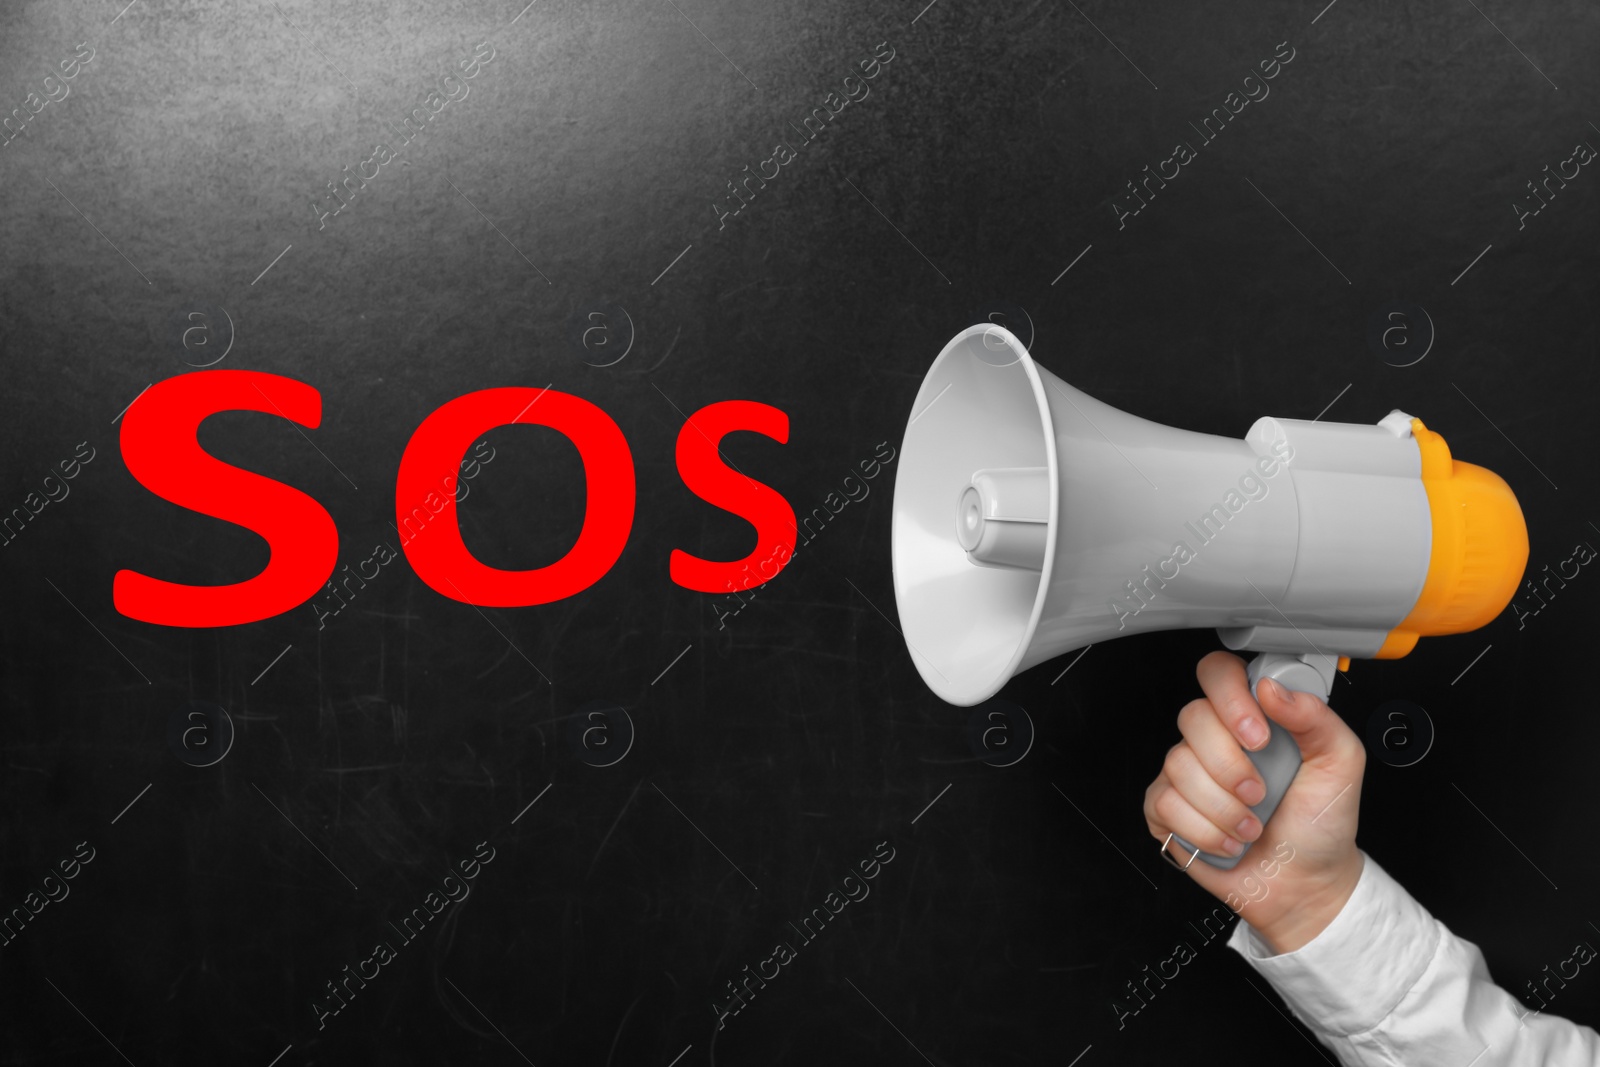 Image of Man holding megaphone and word SOS near chalkboard. Asking for help